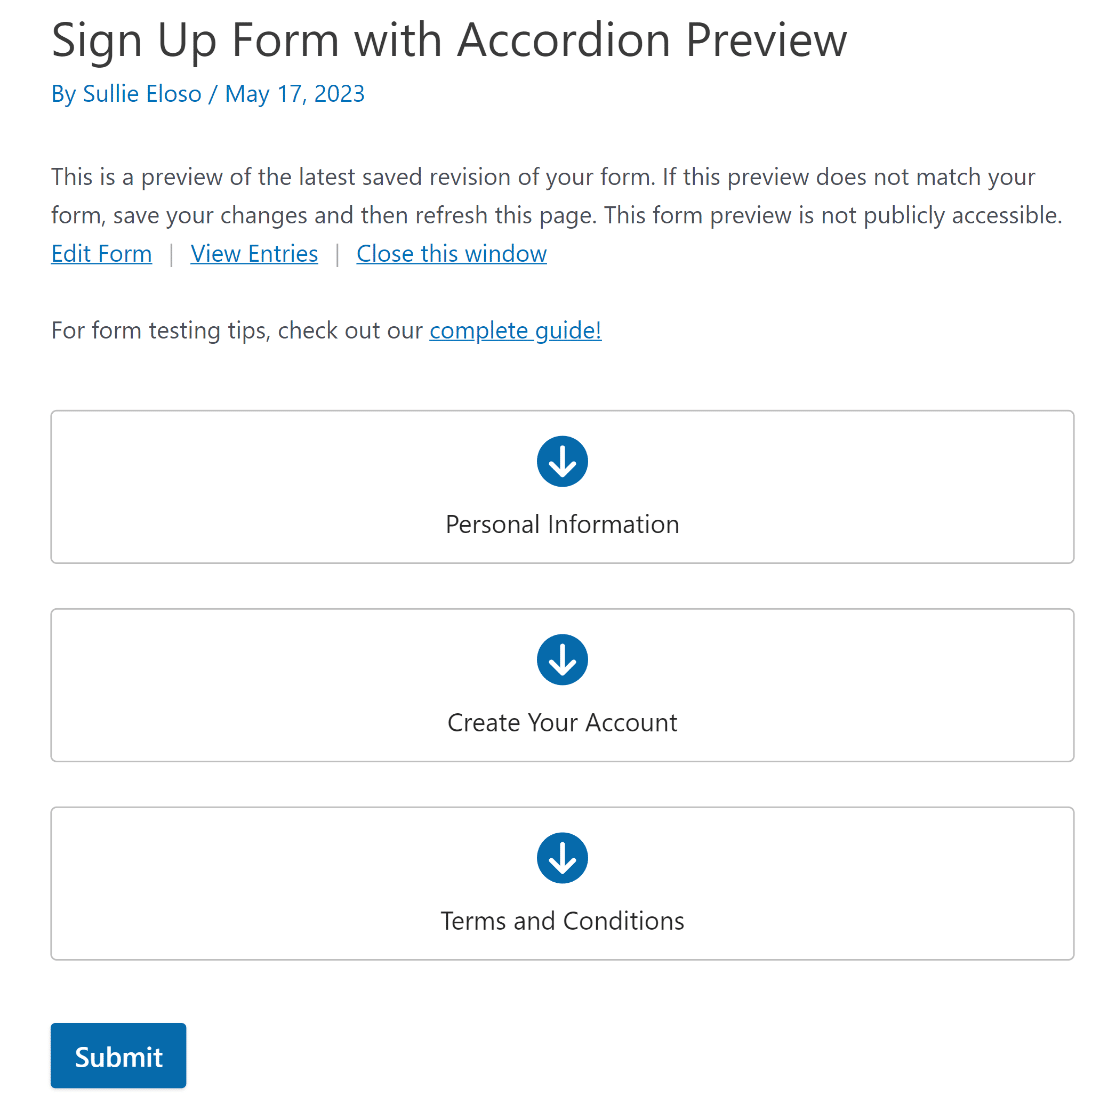 Sign up form with accordion preview